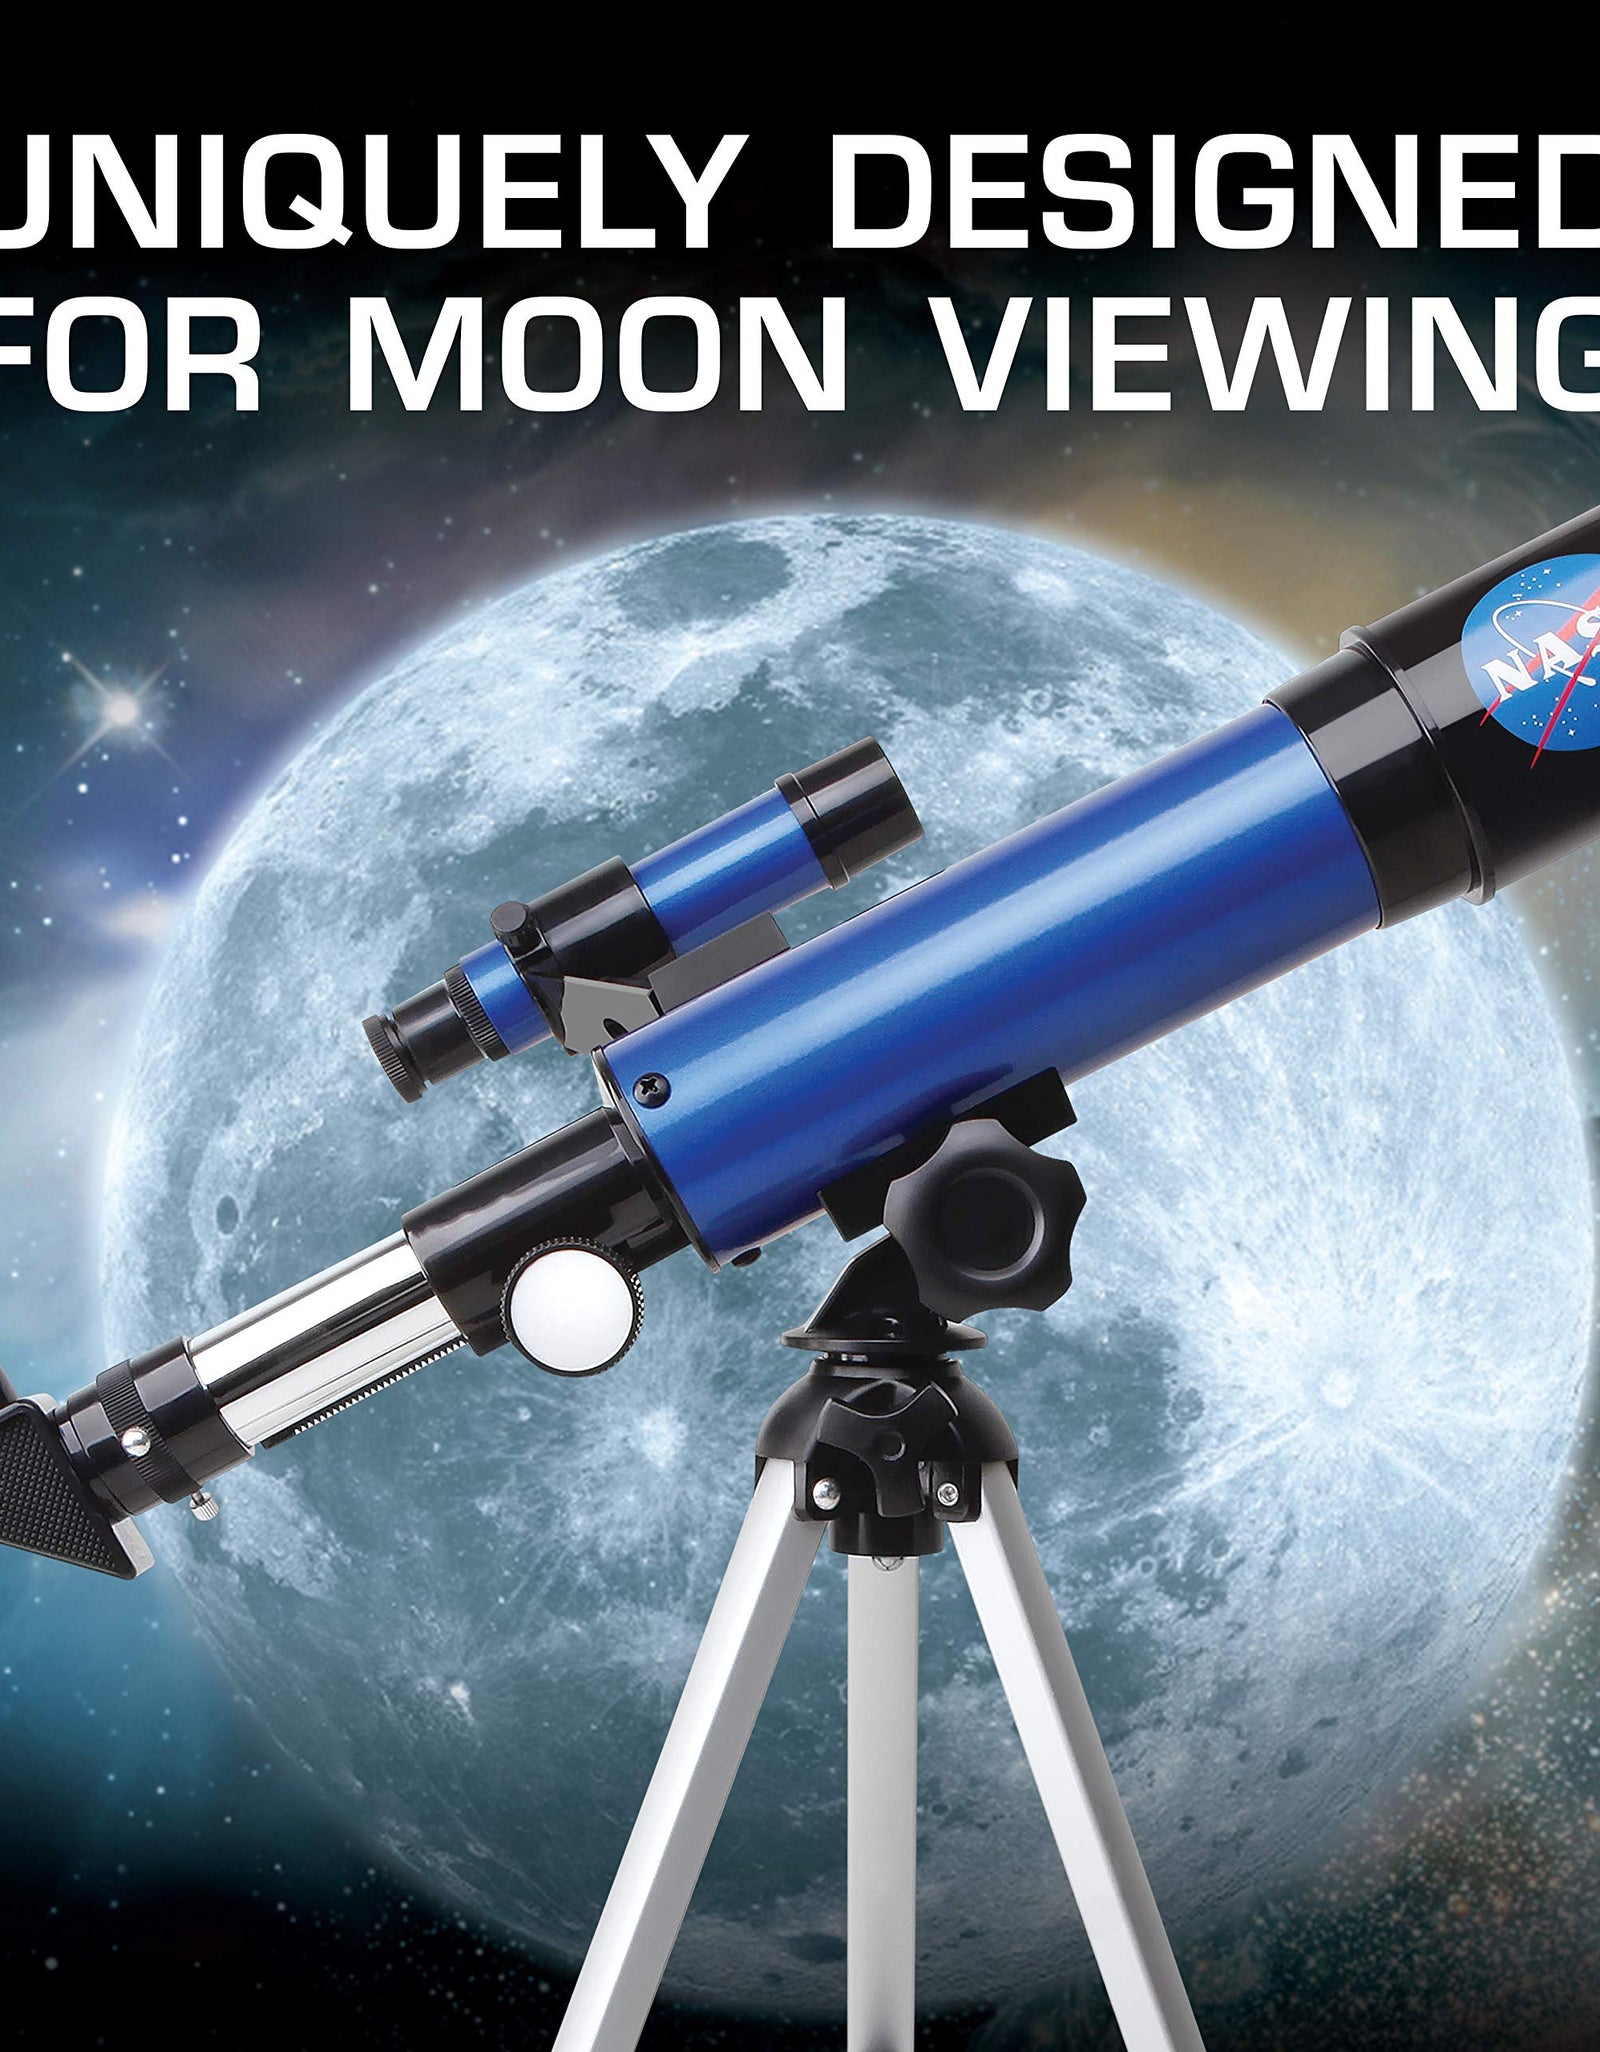 NASA Lunar Telescope for Kids – Capable of 90x Magnification, Includes Two Eyepieces, Tabletop Tripod, Finder Scope, and Full-Color Learning Guide, The Perfect STEM Gift for a Young Astronomer